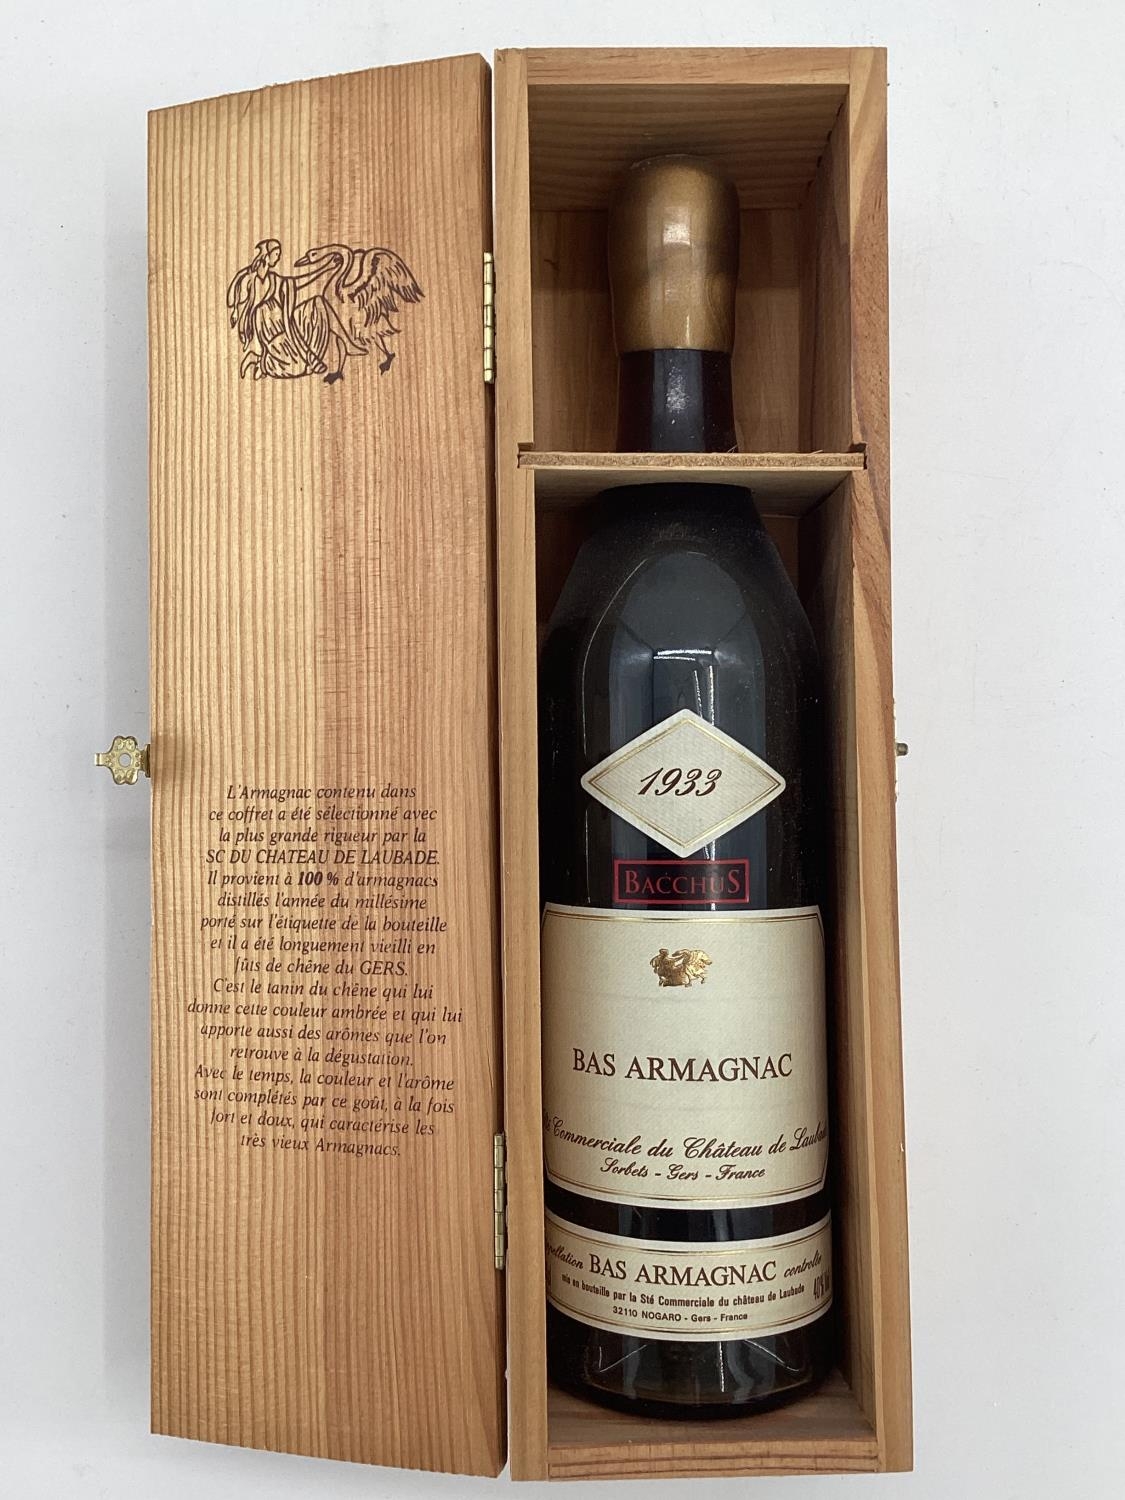 Cased bottle of 1933 Bas Armagnac, as found in the house